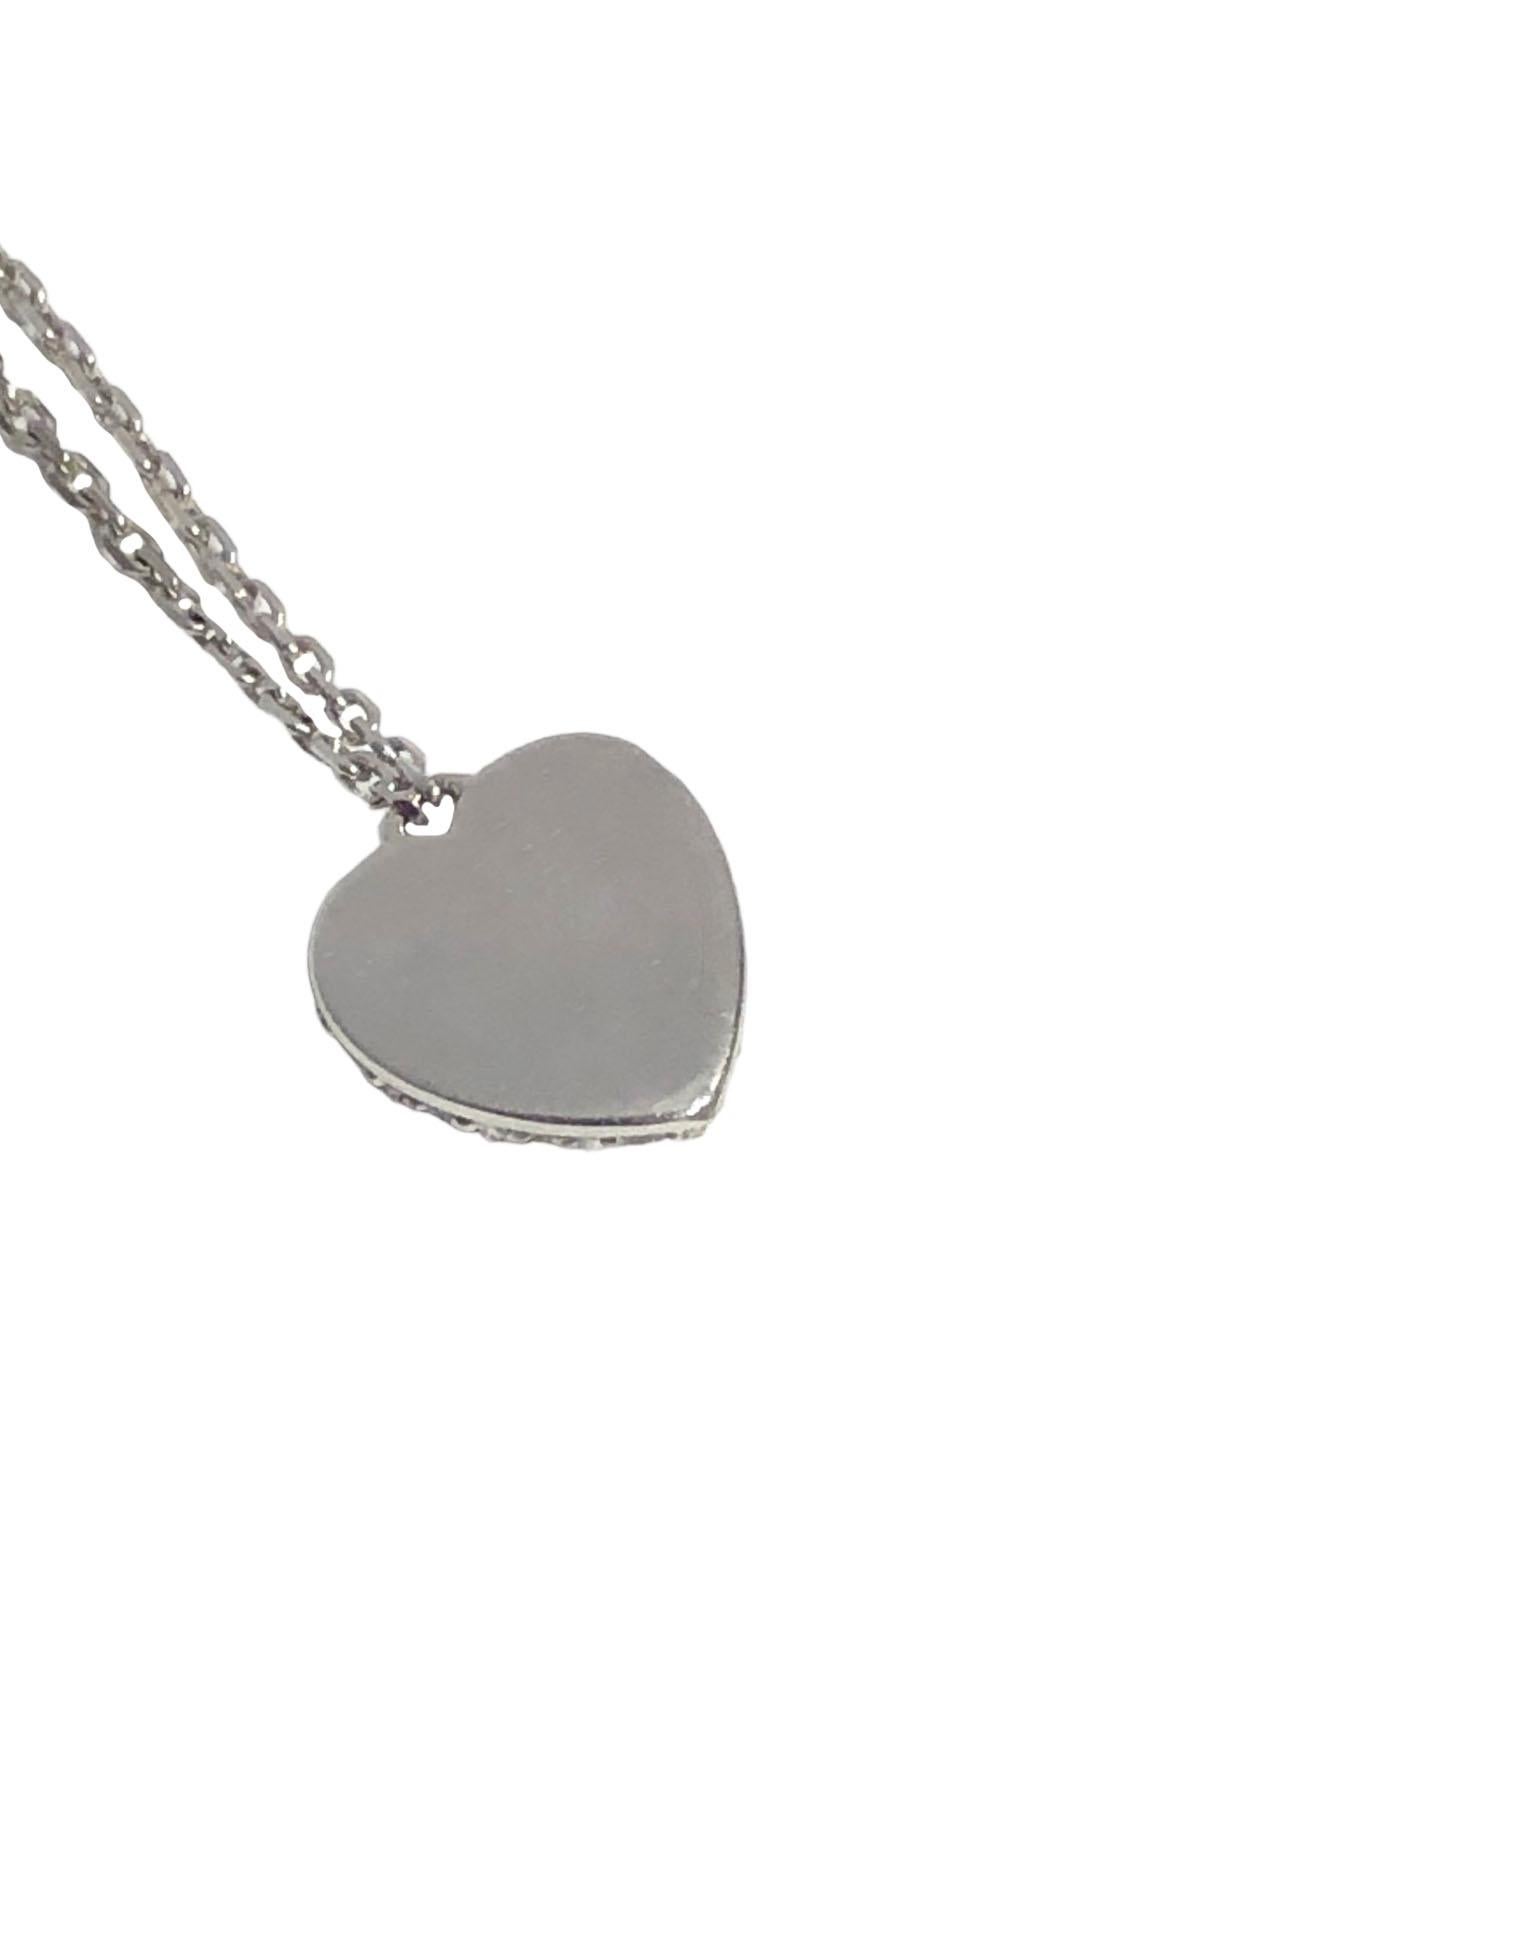 Circa 2010 Cartier Heart Pendant Necklace, 18k White Gold with the heart measuring 3/8 X 3/8 inch and is set with Round Brilliant cut Diamonds totaling 1/2 Carat. Suspended from a 16 inch link chain. Signed and numbered.